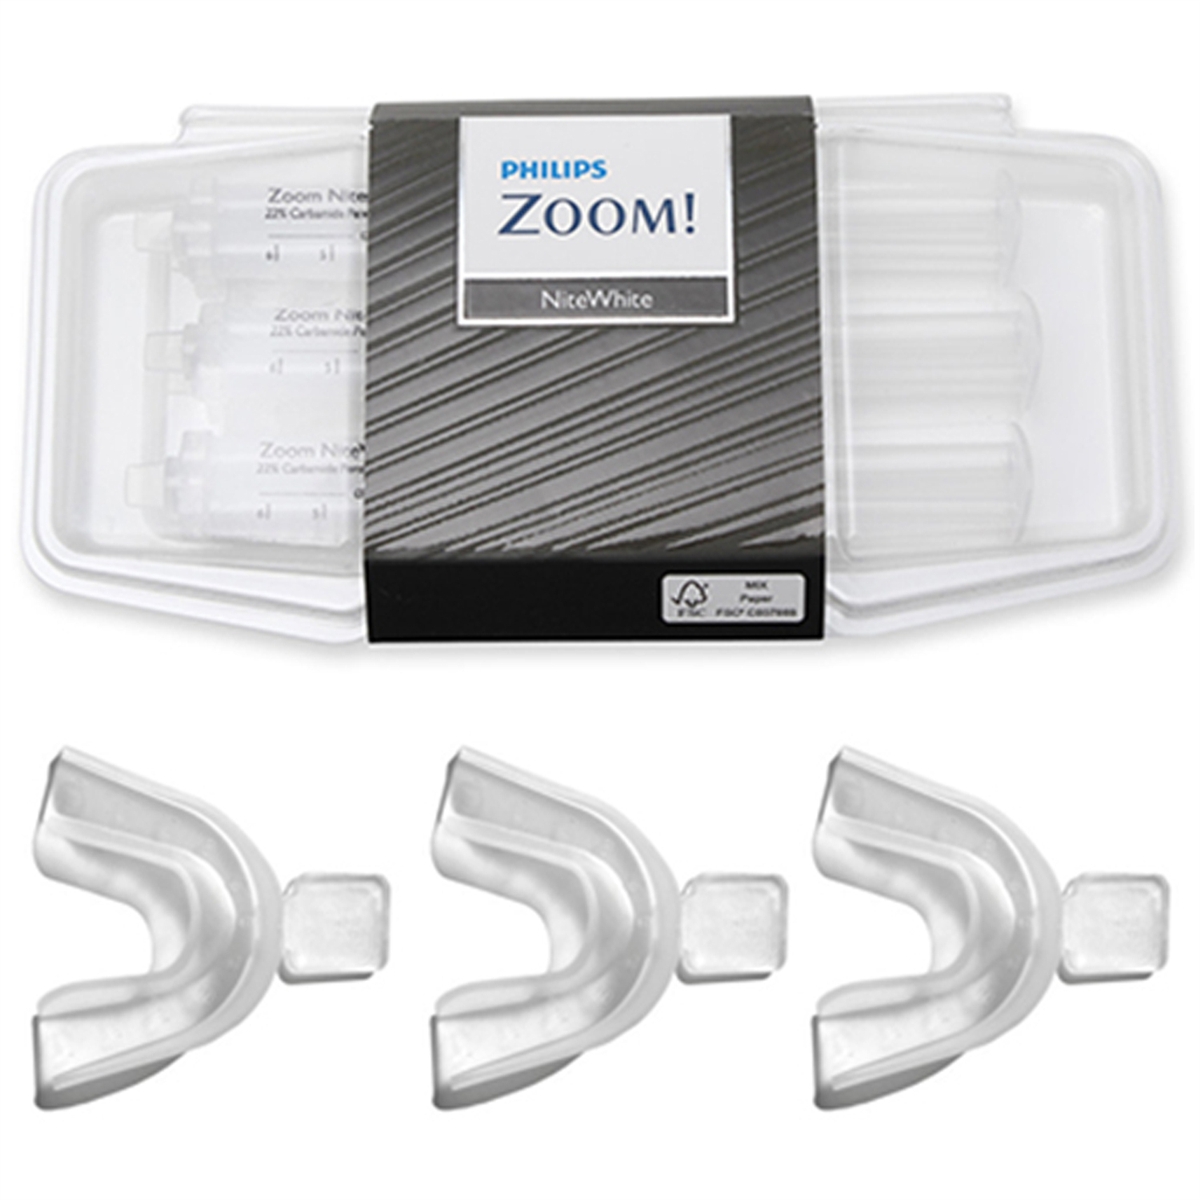 Philips Zoom Nitewhite 16% Teeth Whitening Gel 3 Pack Combo With Trays